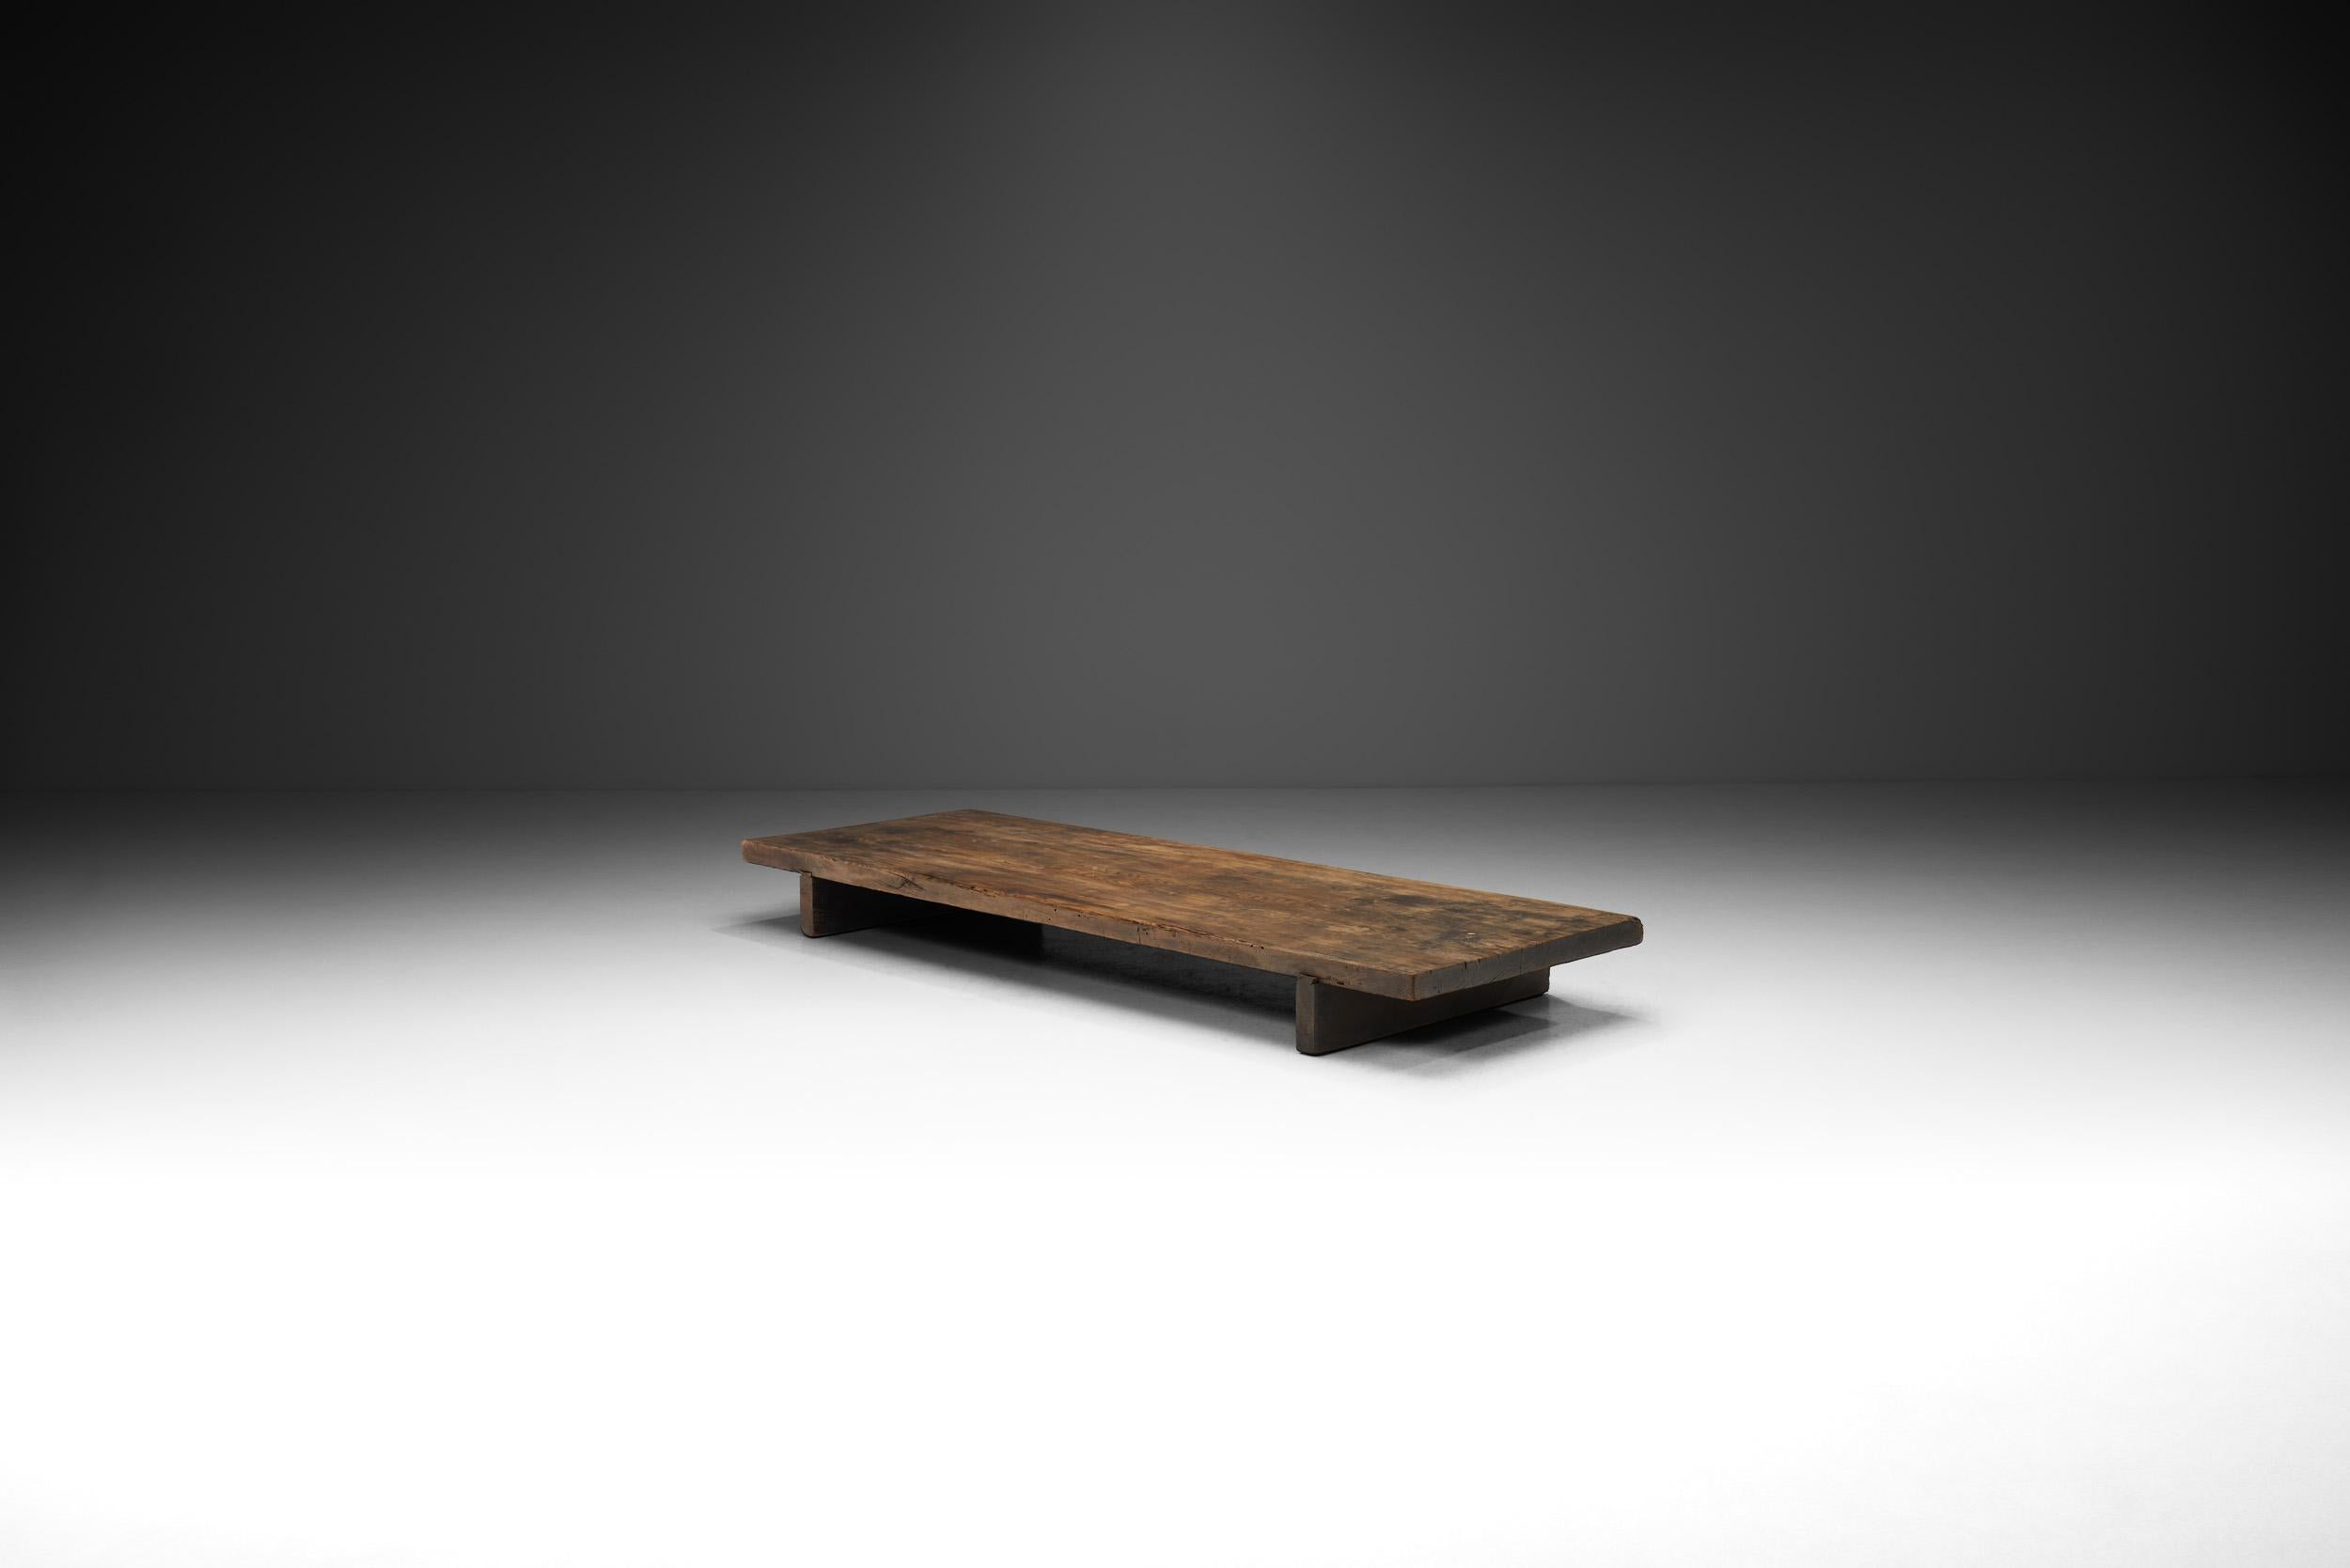 Grounded both figuratively and physically, this stunning low table is all about wood. According to the wabi sabi ideas, there is an elusive beauty to imperfection. Wabi sabi can be understood as an appreciation of a beauty that is doomed to